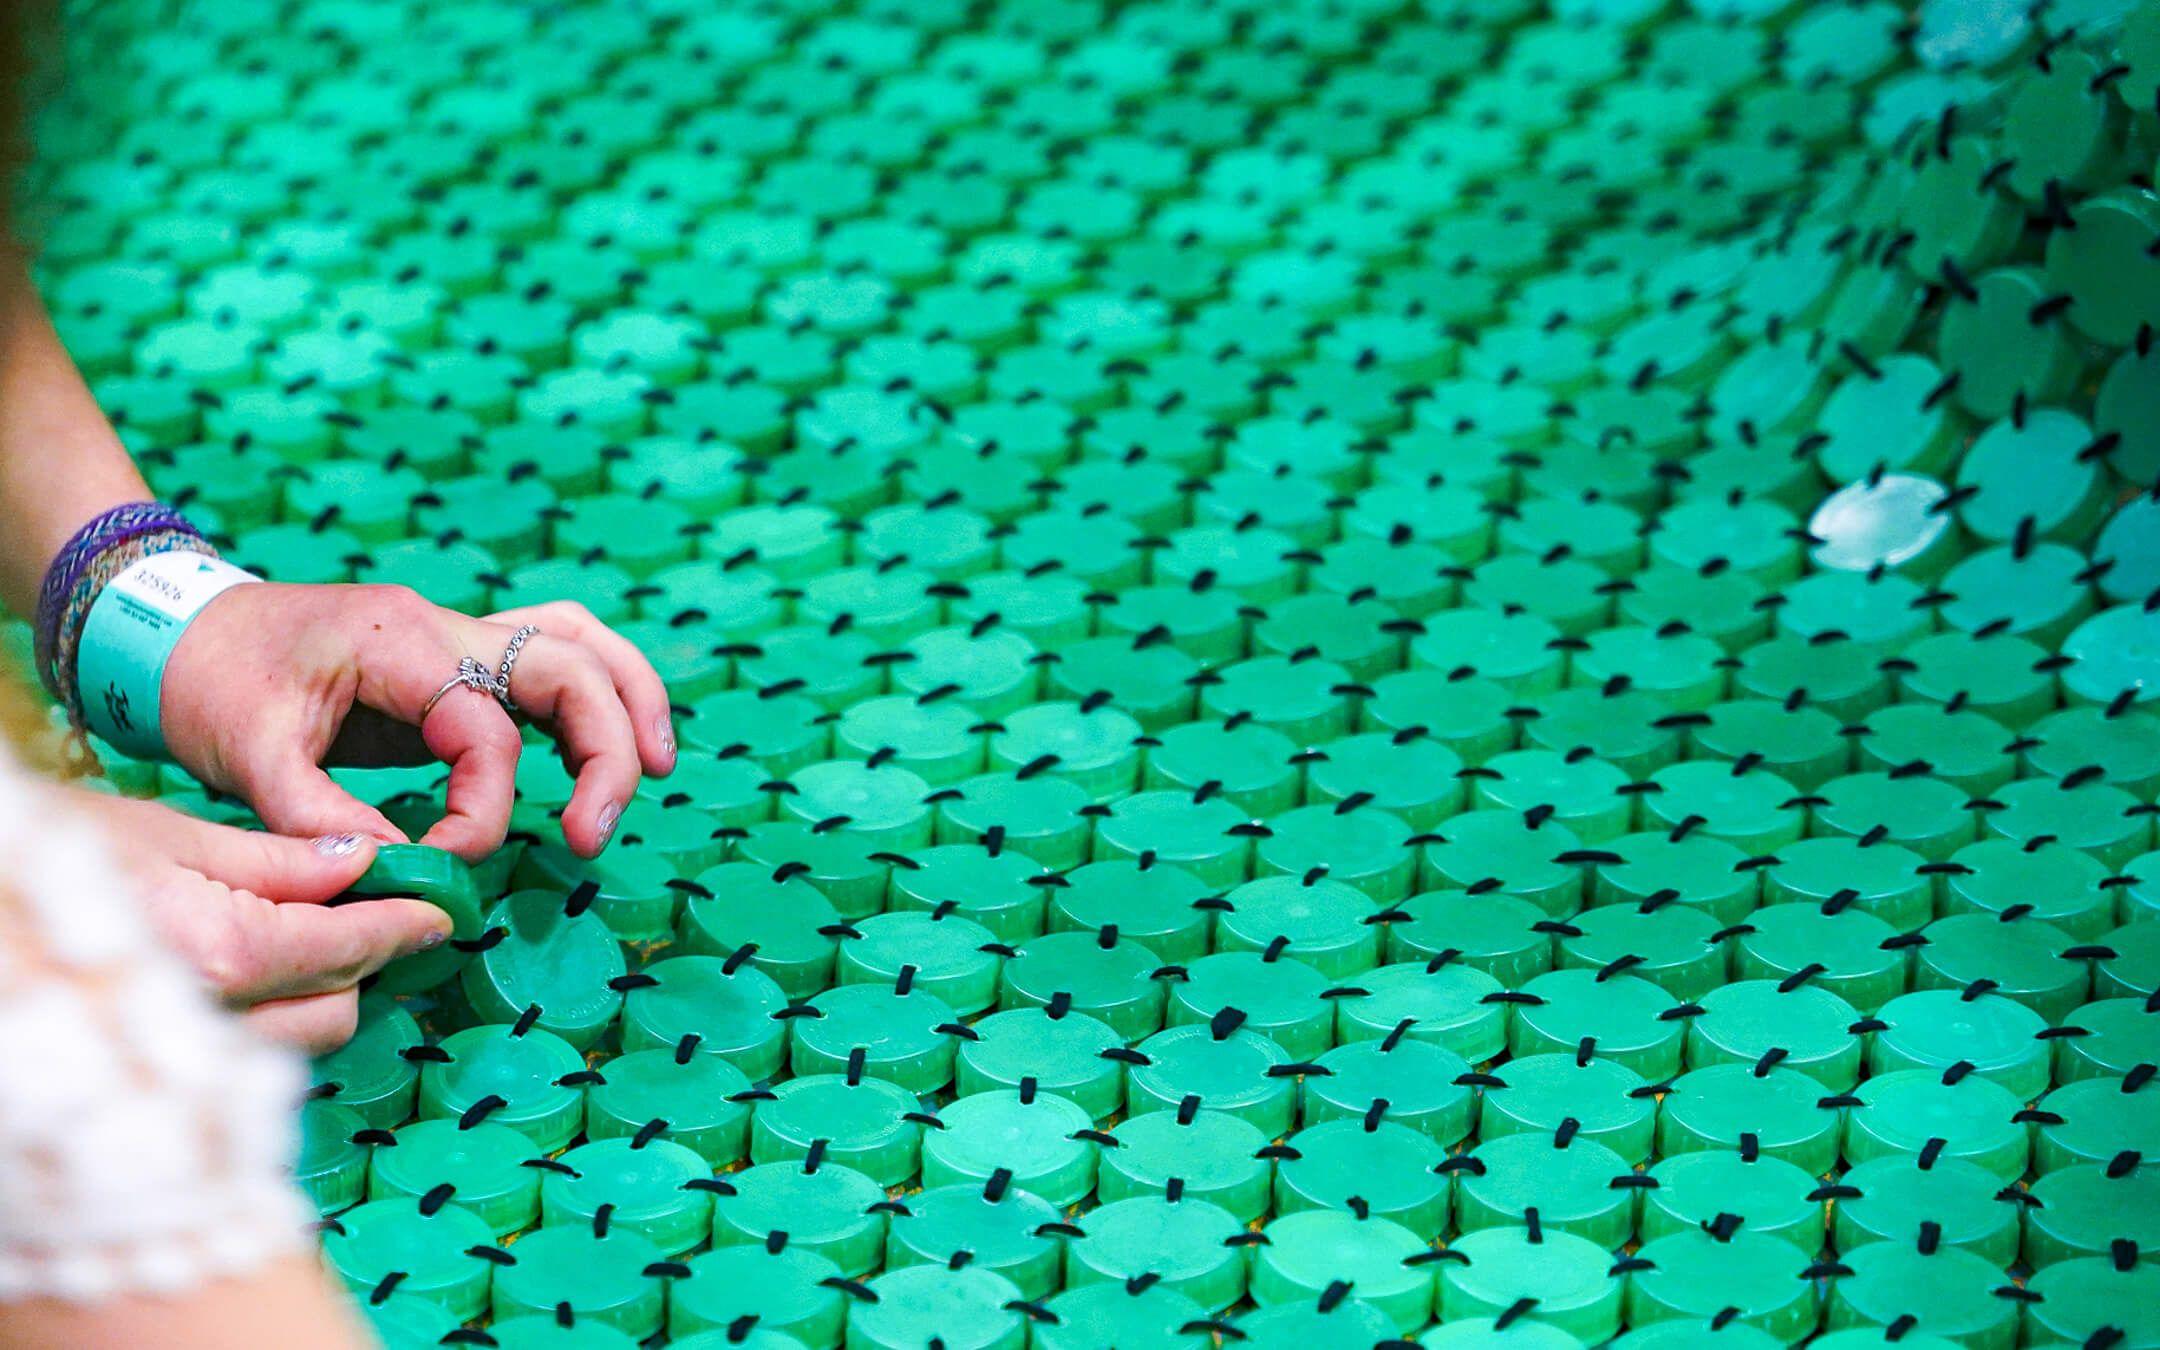 Close-up shot of End of an Era from Marling School, UK, made from 1,323 green bottle caps and 137 clear bottle caps.
Photographer: Stephane Danna